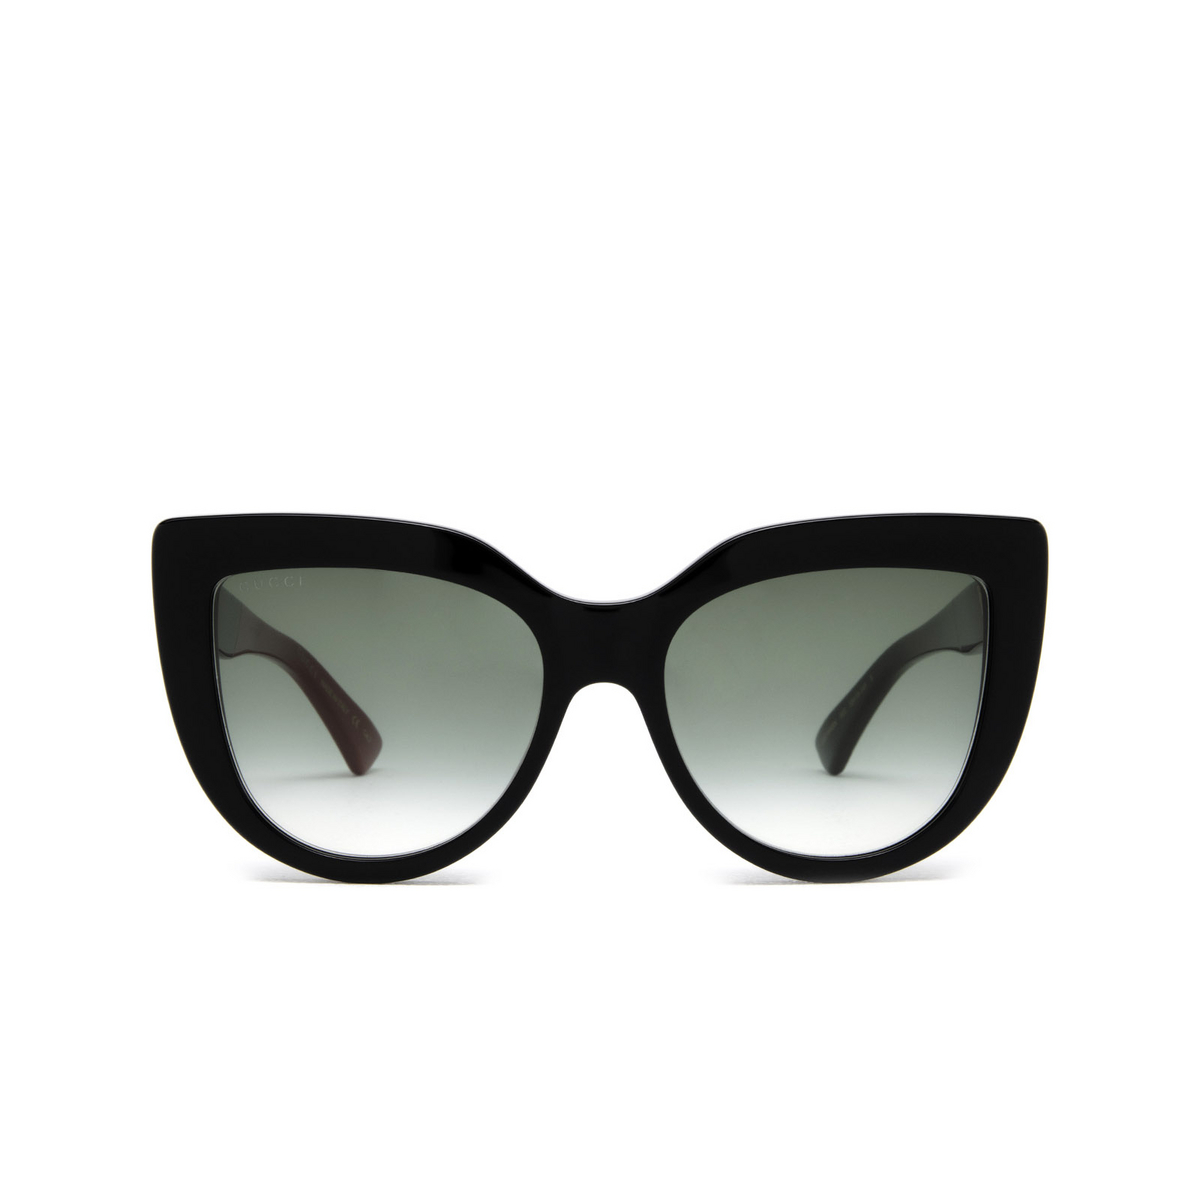 Gucci® Cat-eye Sunglasses: GG0164SN color Black 003 - front view.